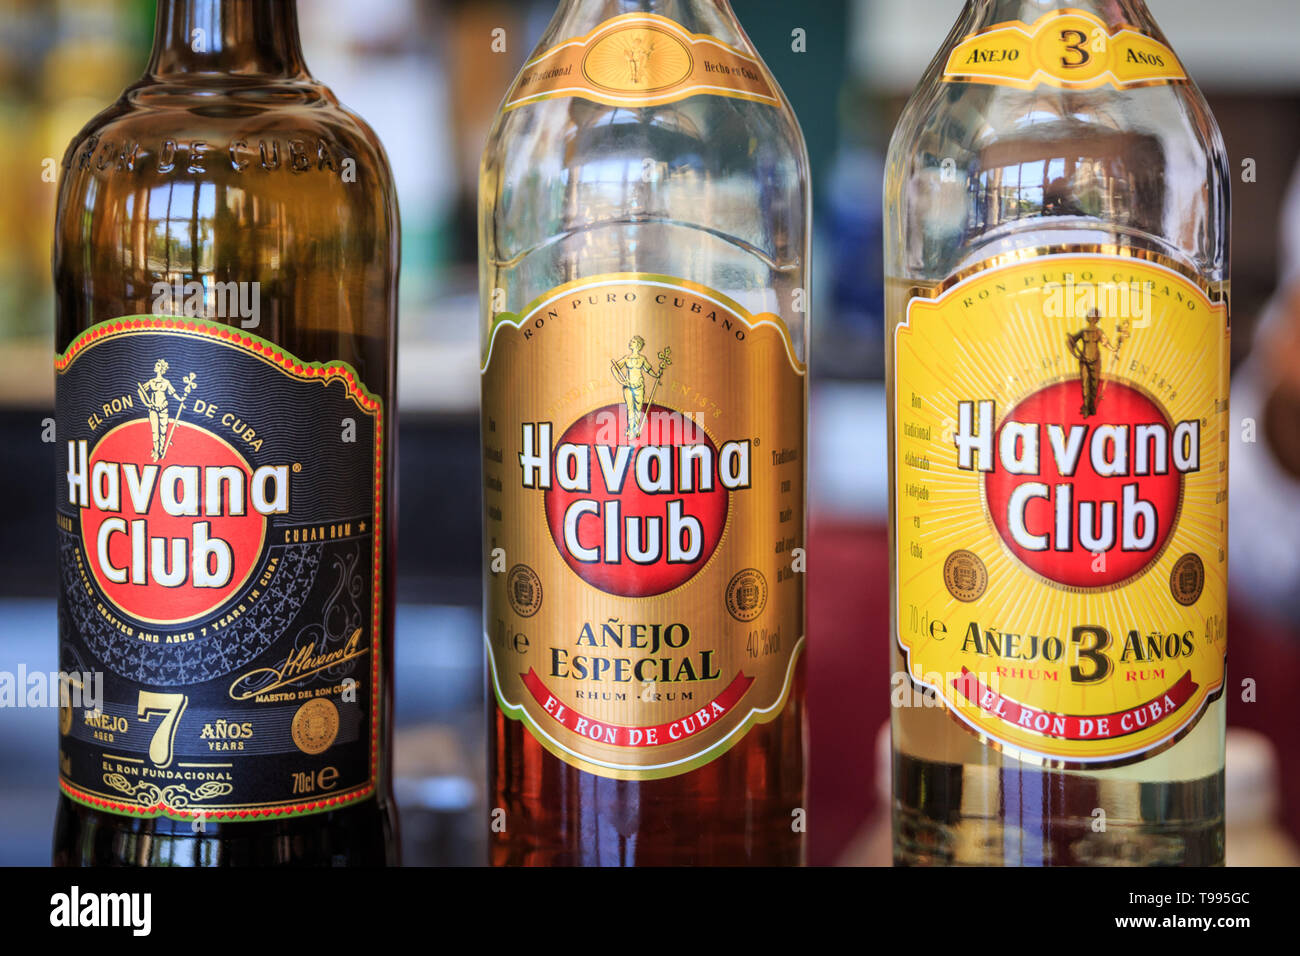 Havana Club Cuban rum bottles and labels, 3 years, 7 years and Especial,  Cuba Stock Photo - Alamy